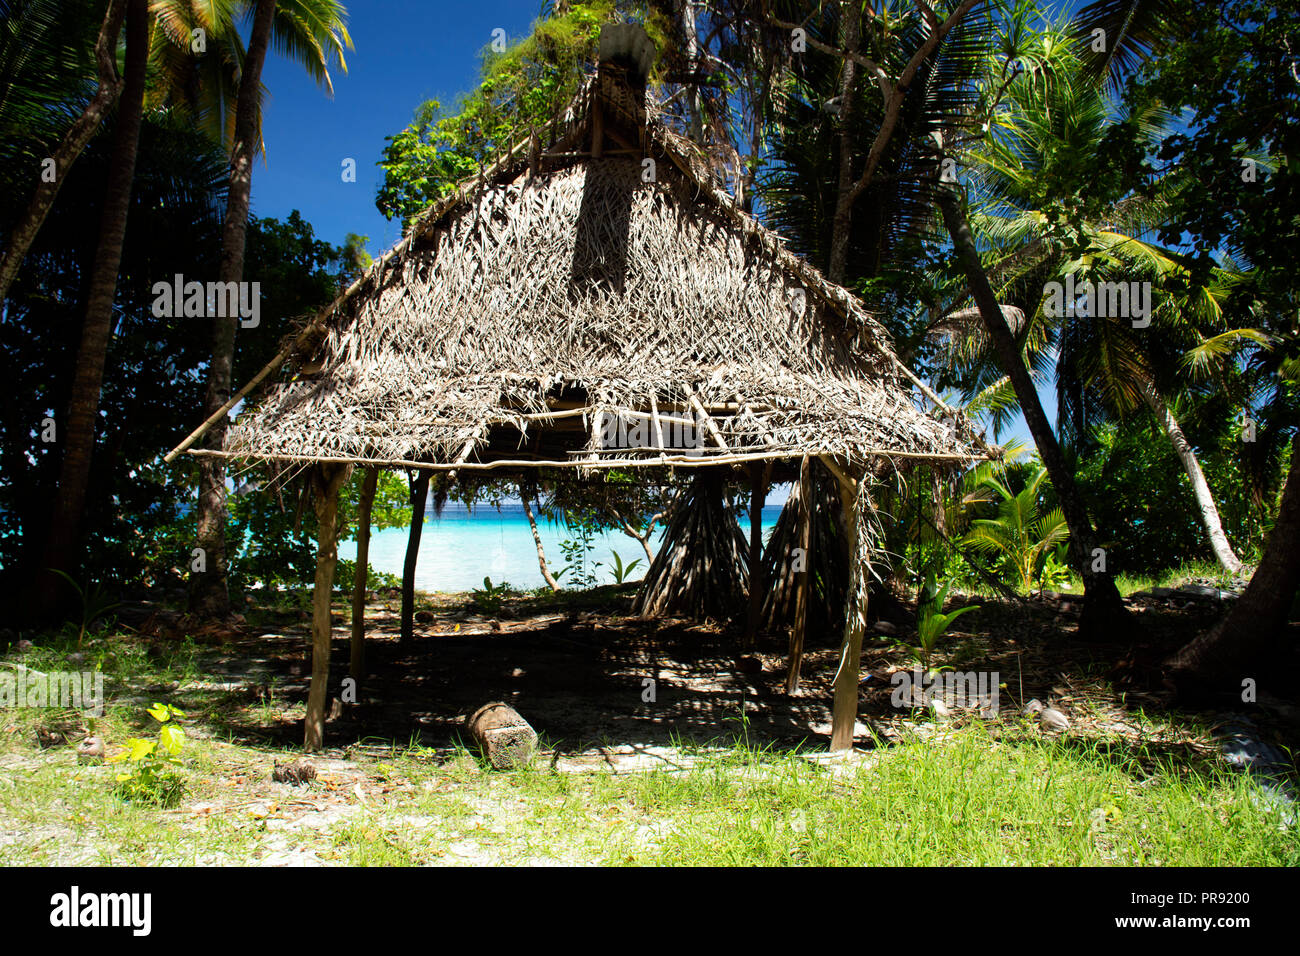 Micronesian hut in a tropical beach at Ant Atoll, Pohnpei, Federated States of Micronesia Stock Photo